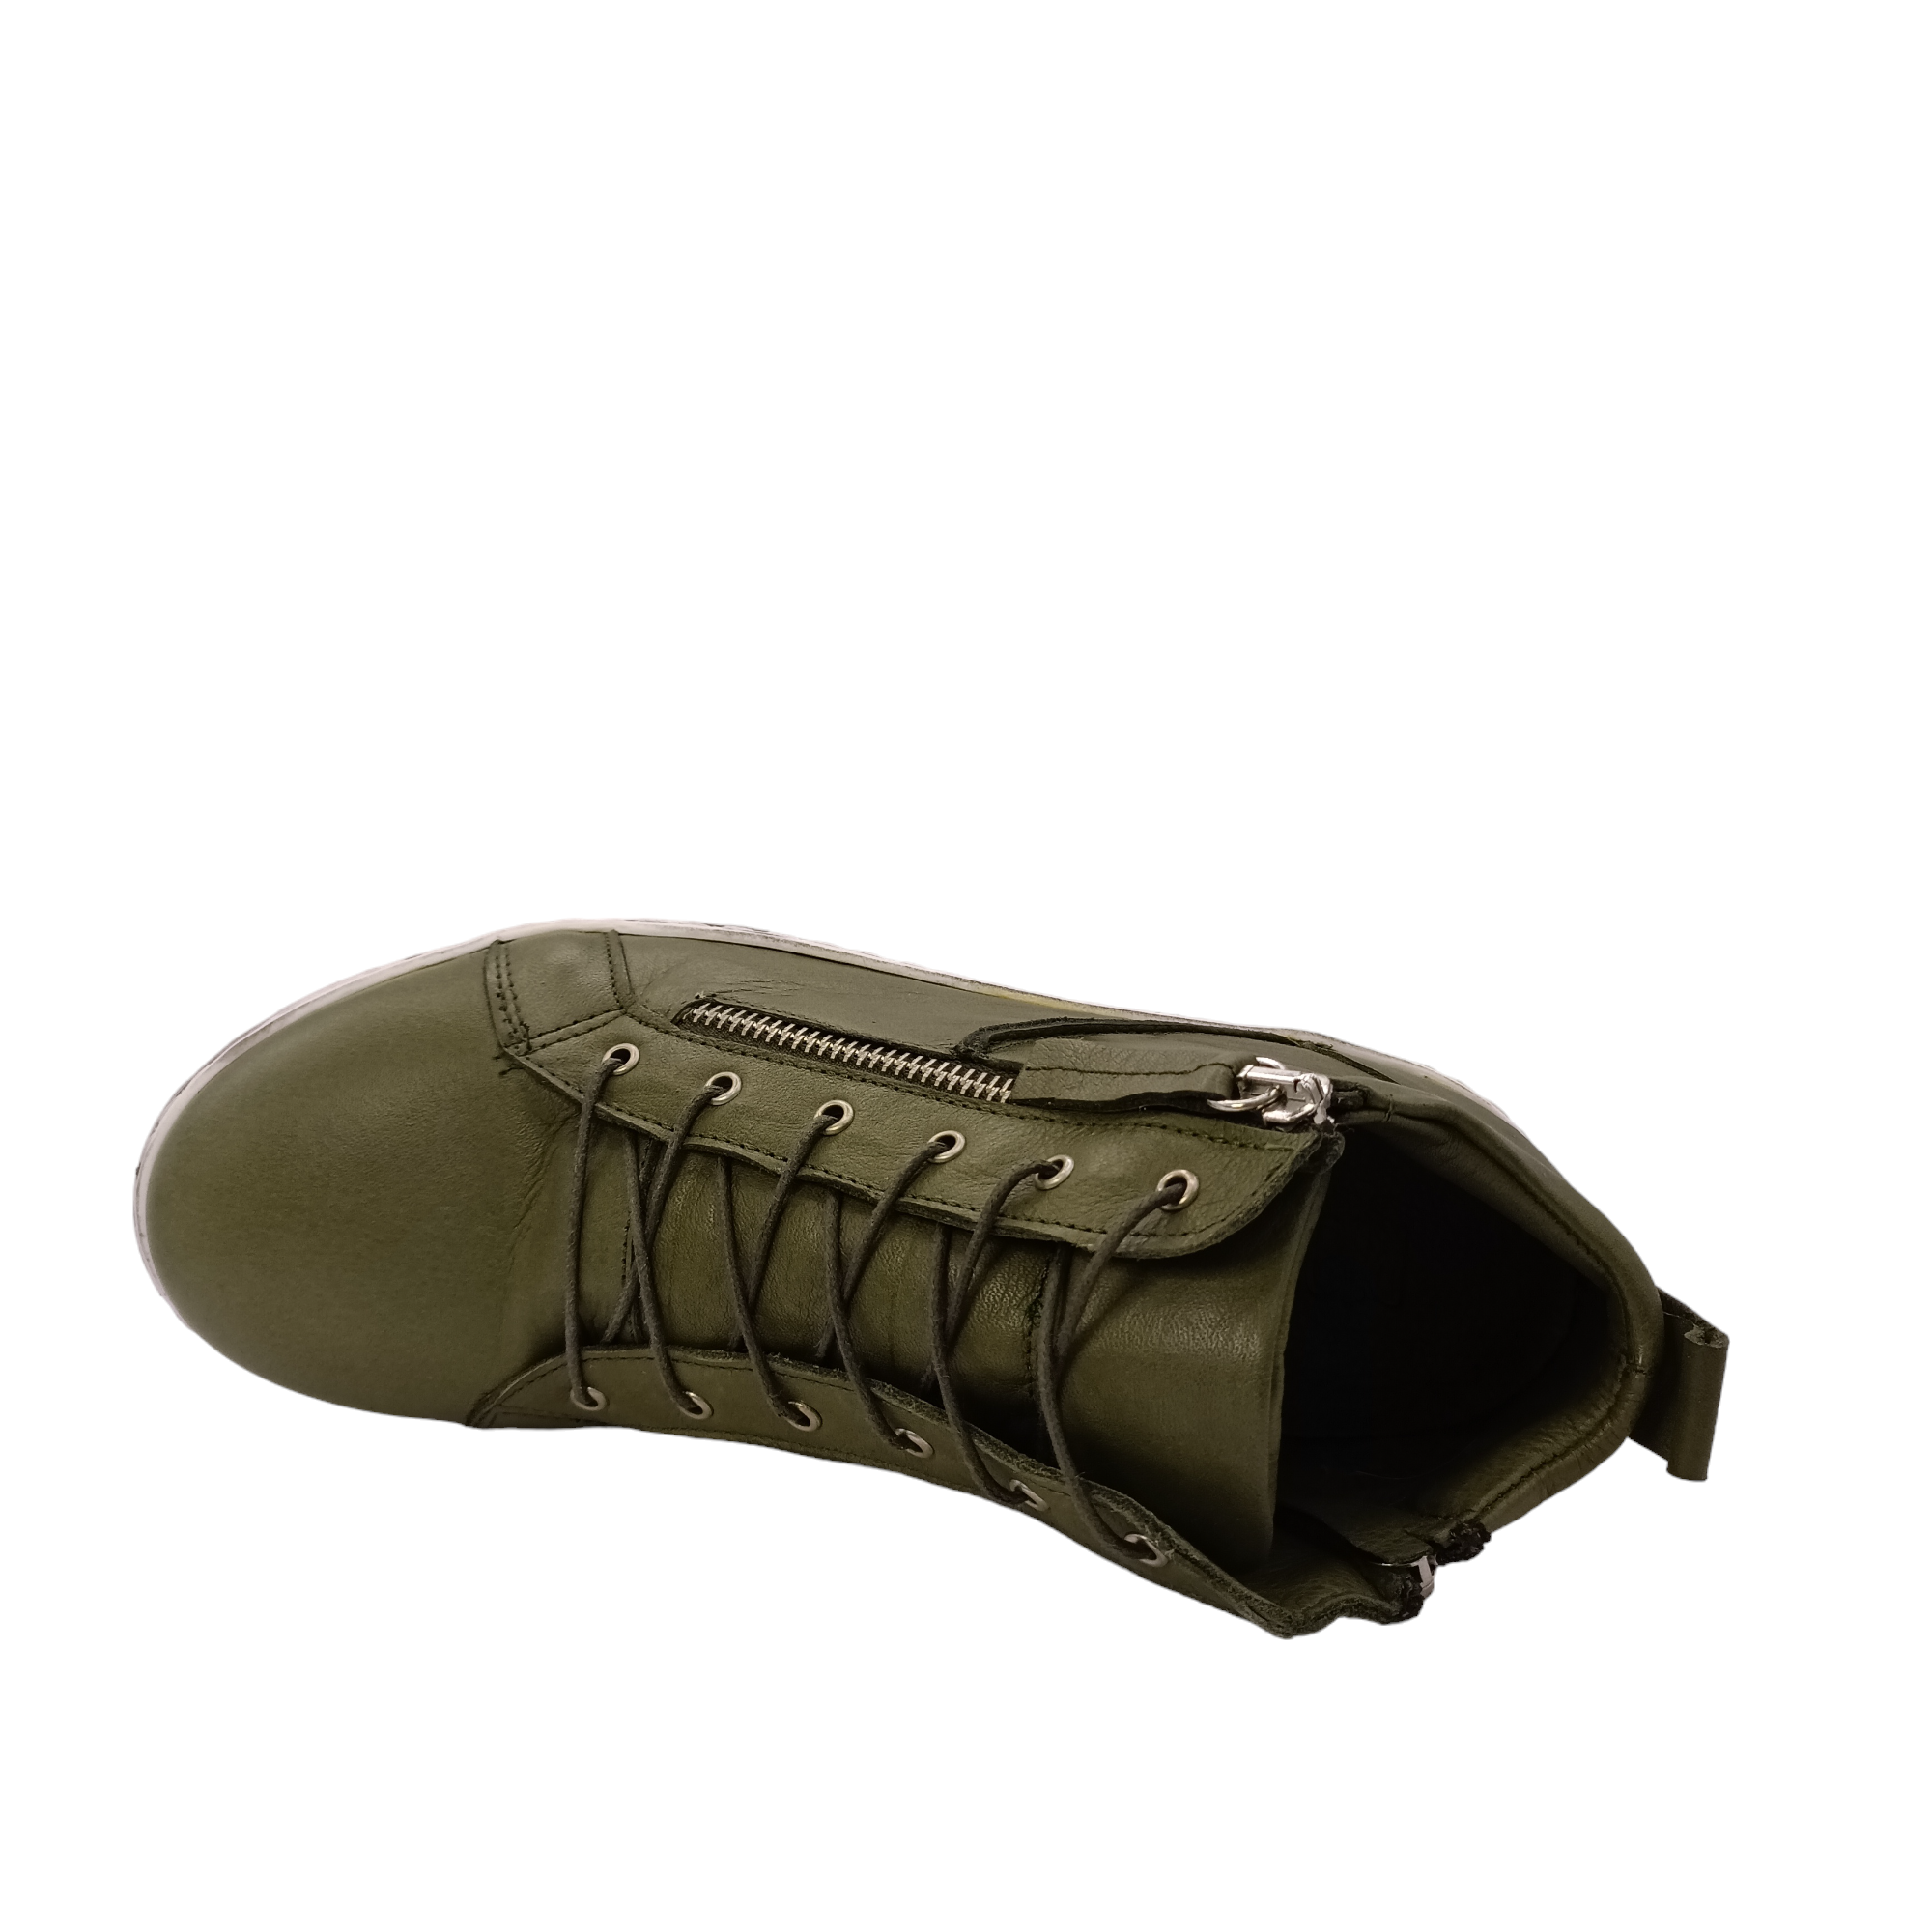 Shop Tender Rilassare - with shoe&amp;me - from Rilassare - Boots - Boot, Winter, Womens - [collection]